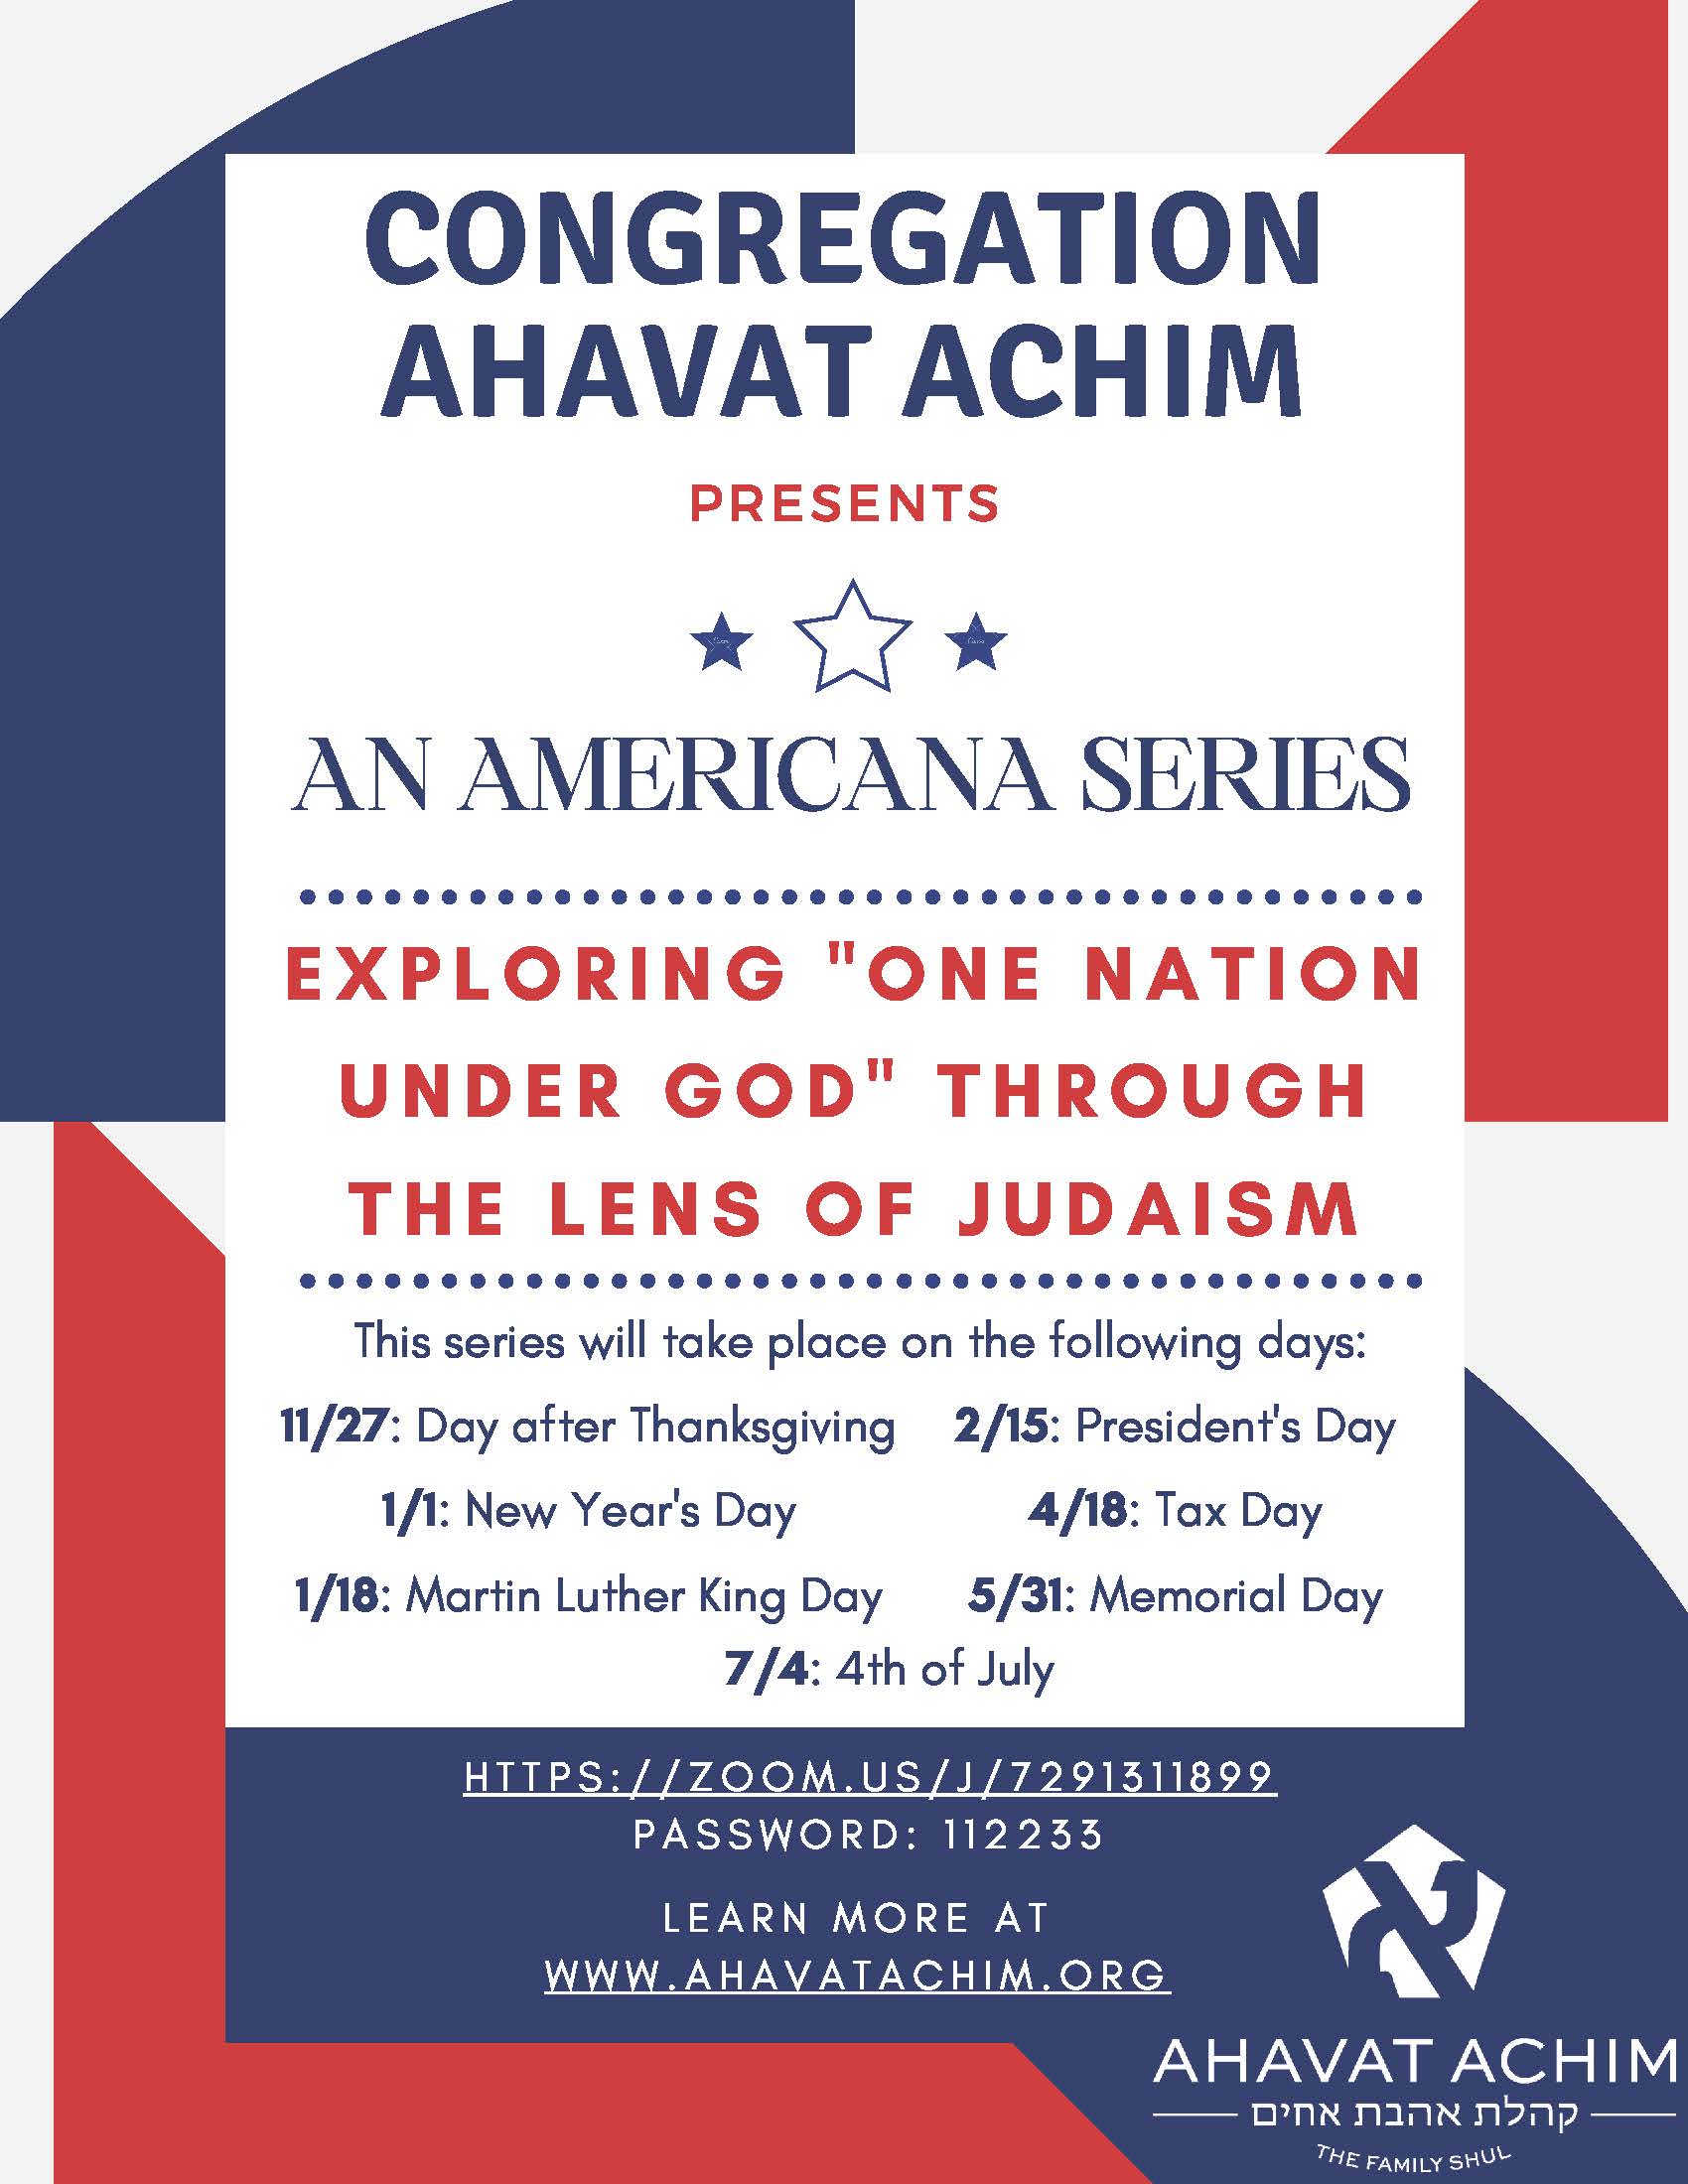 AN AMERICANA SERIES - EXPLORING "ONE NATION UNDER GOD" THROUGH THE LENS OF JUDAISM